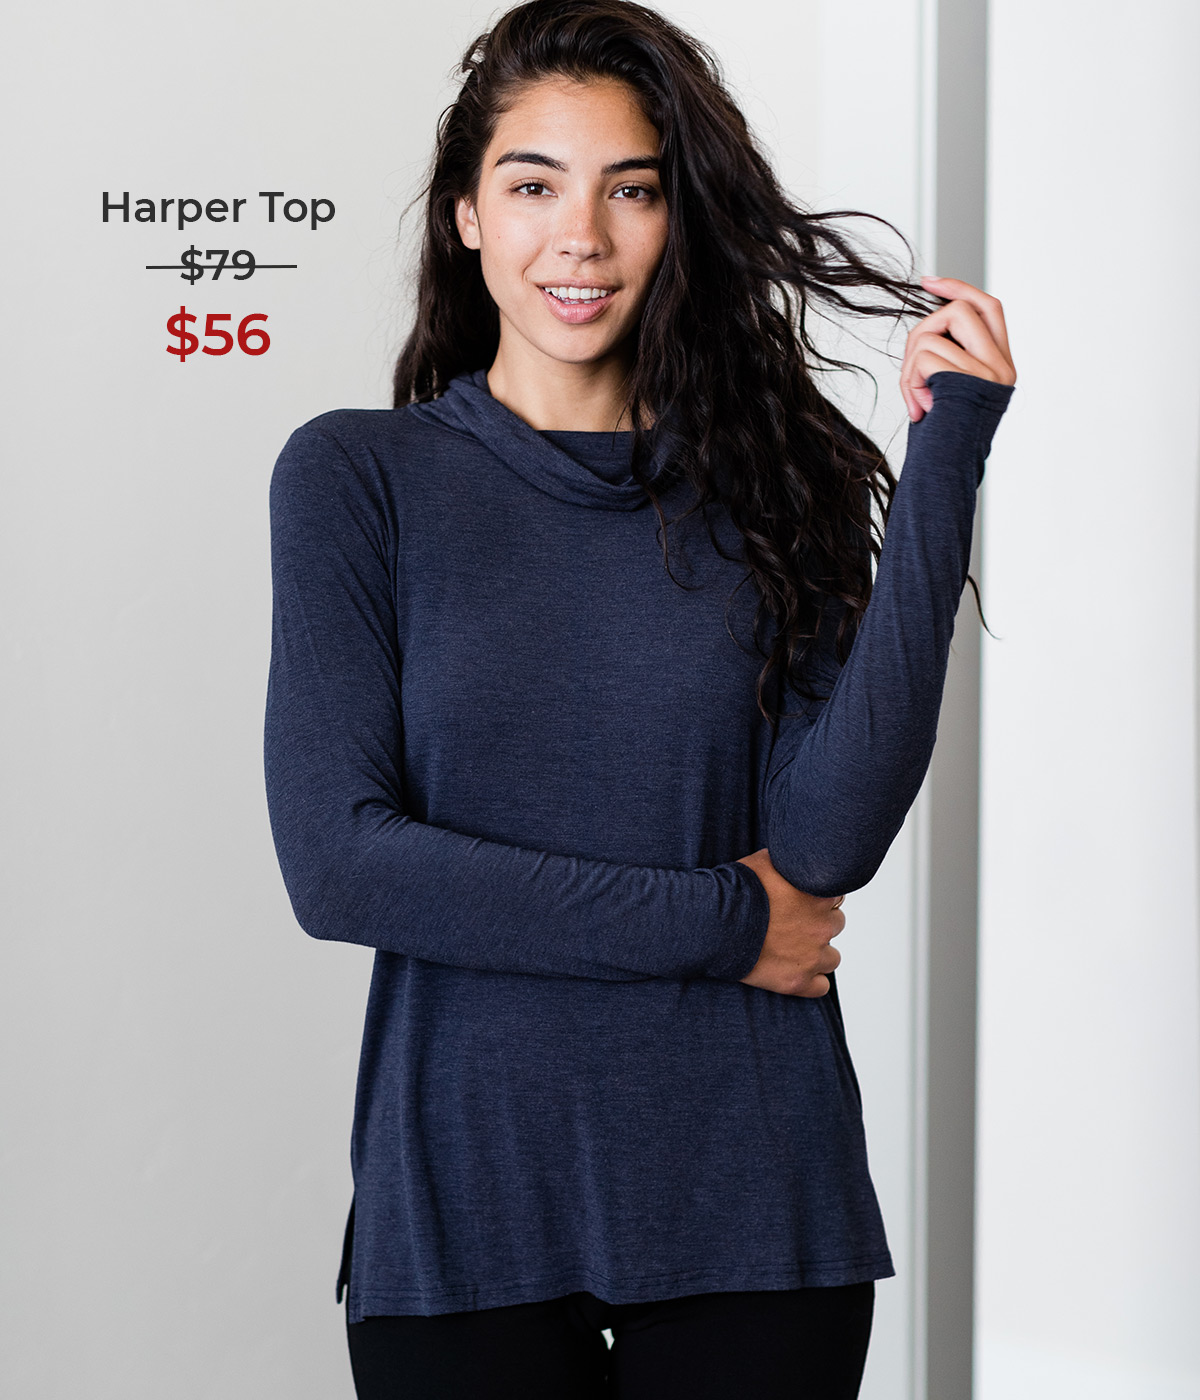 The Harper top now $56